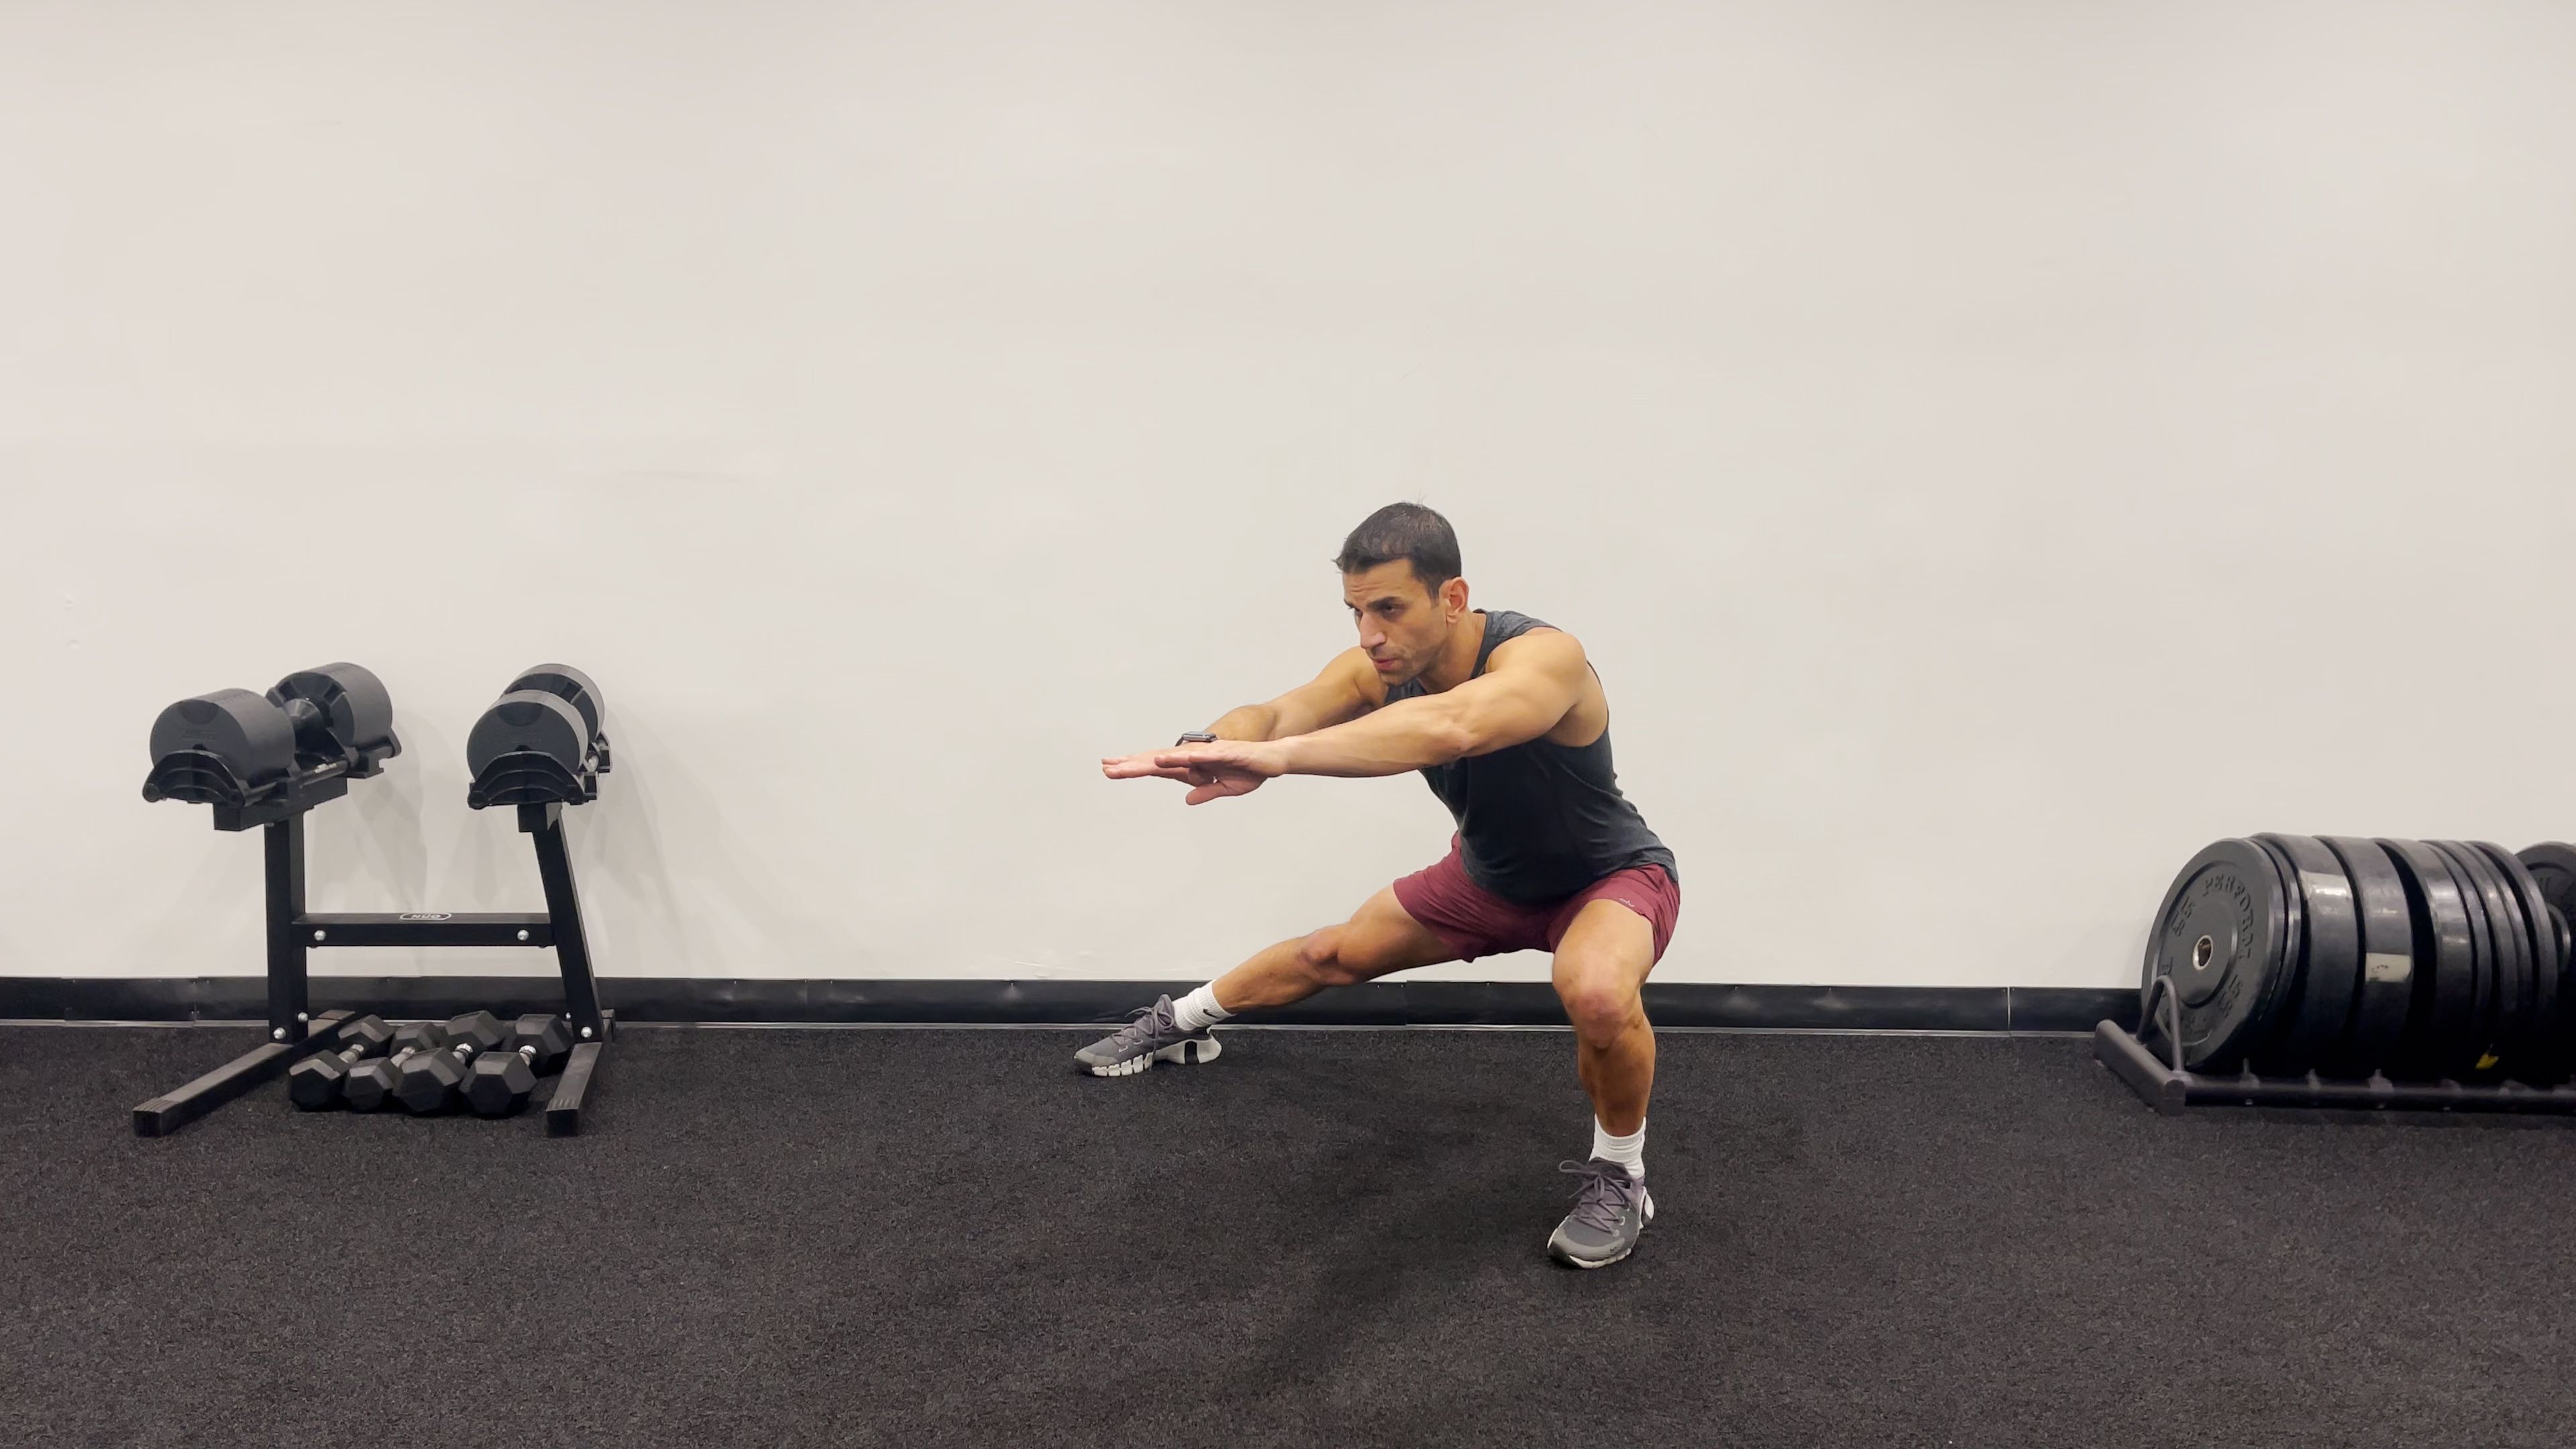 10-Minute Full-Body Workout to Improve Strength and Performance